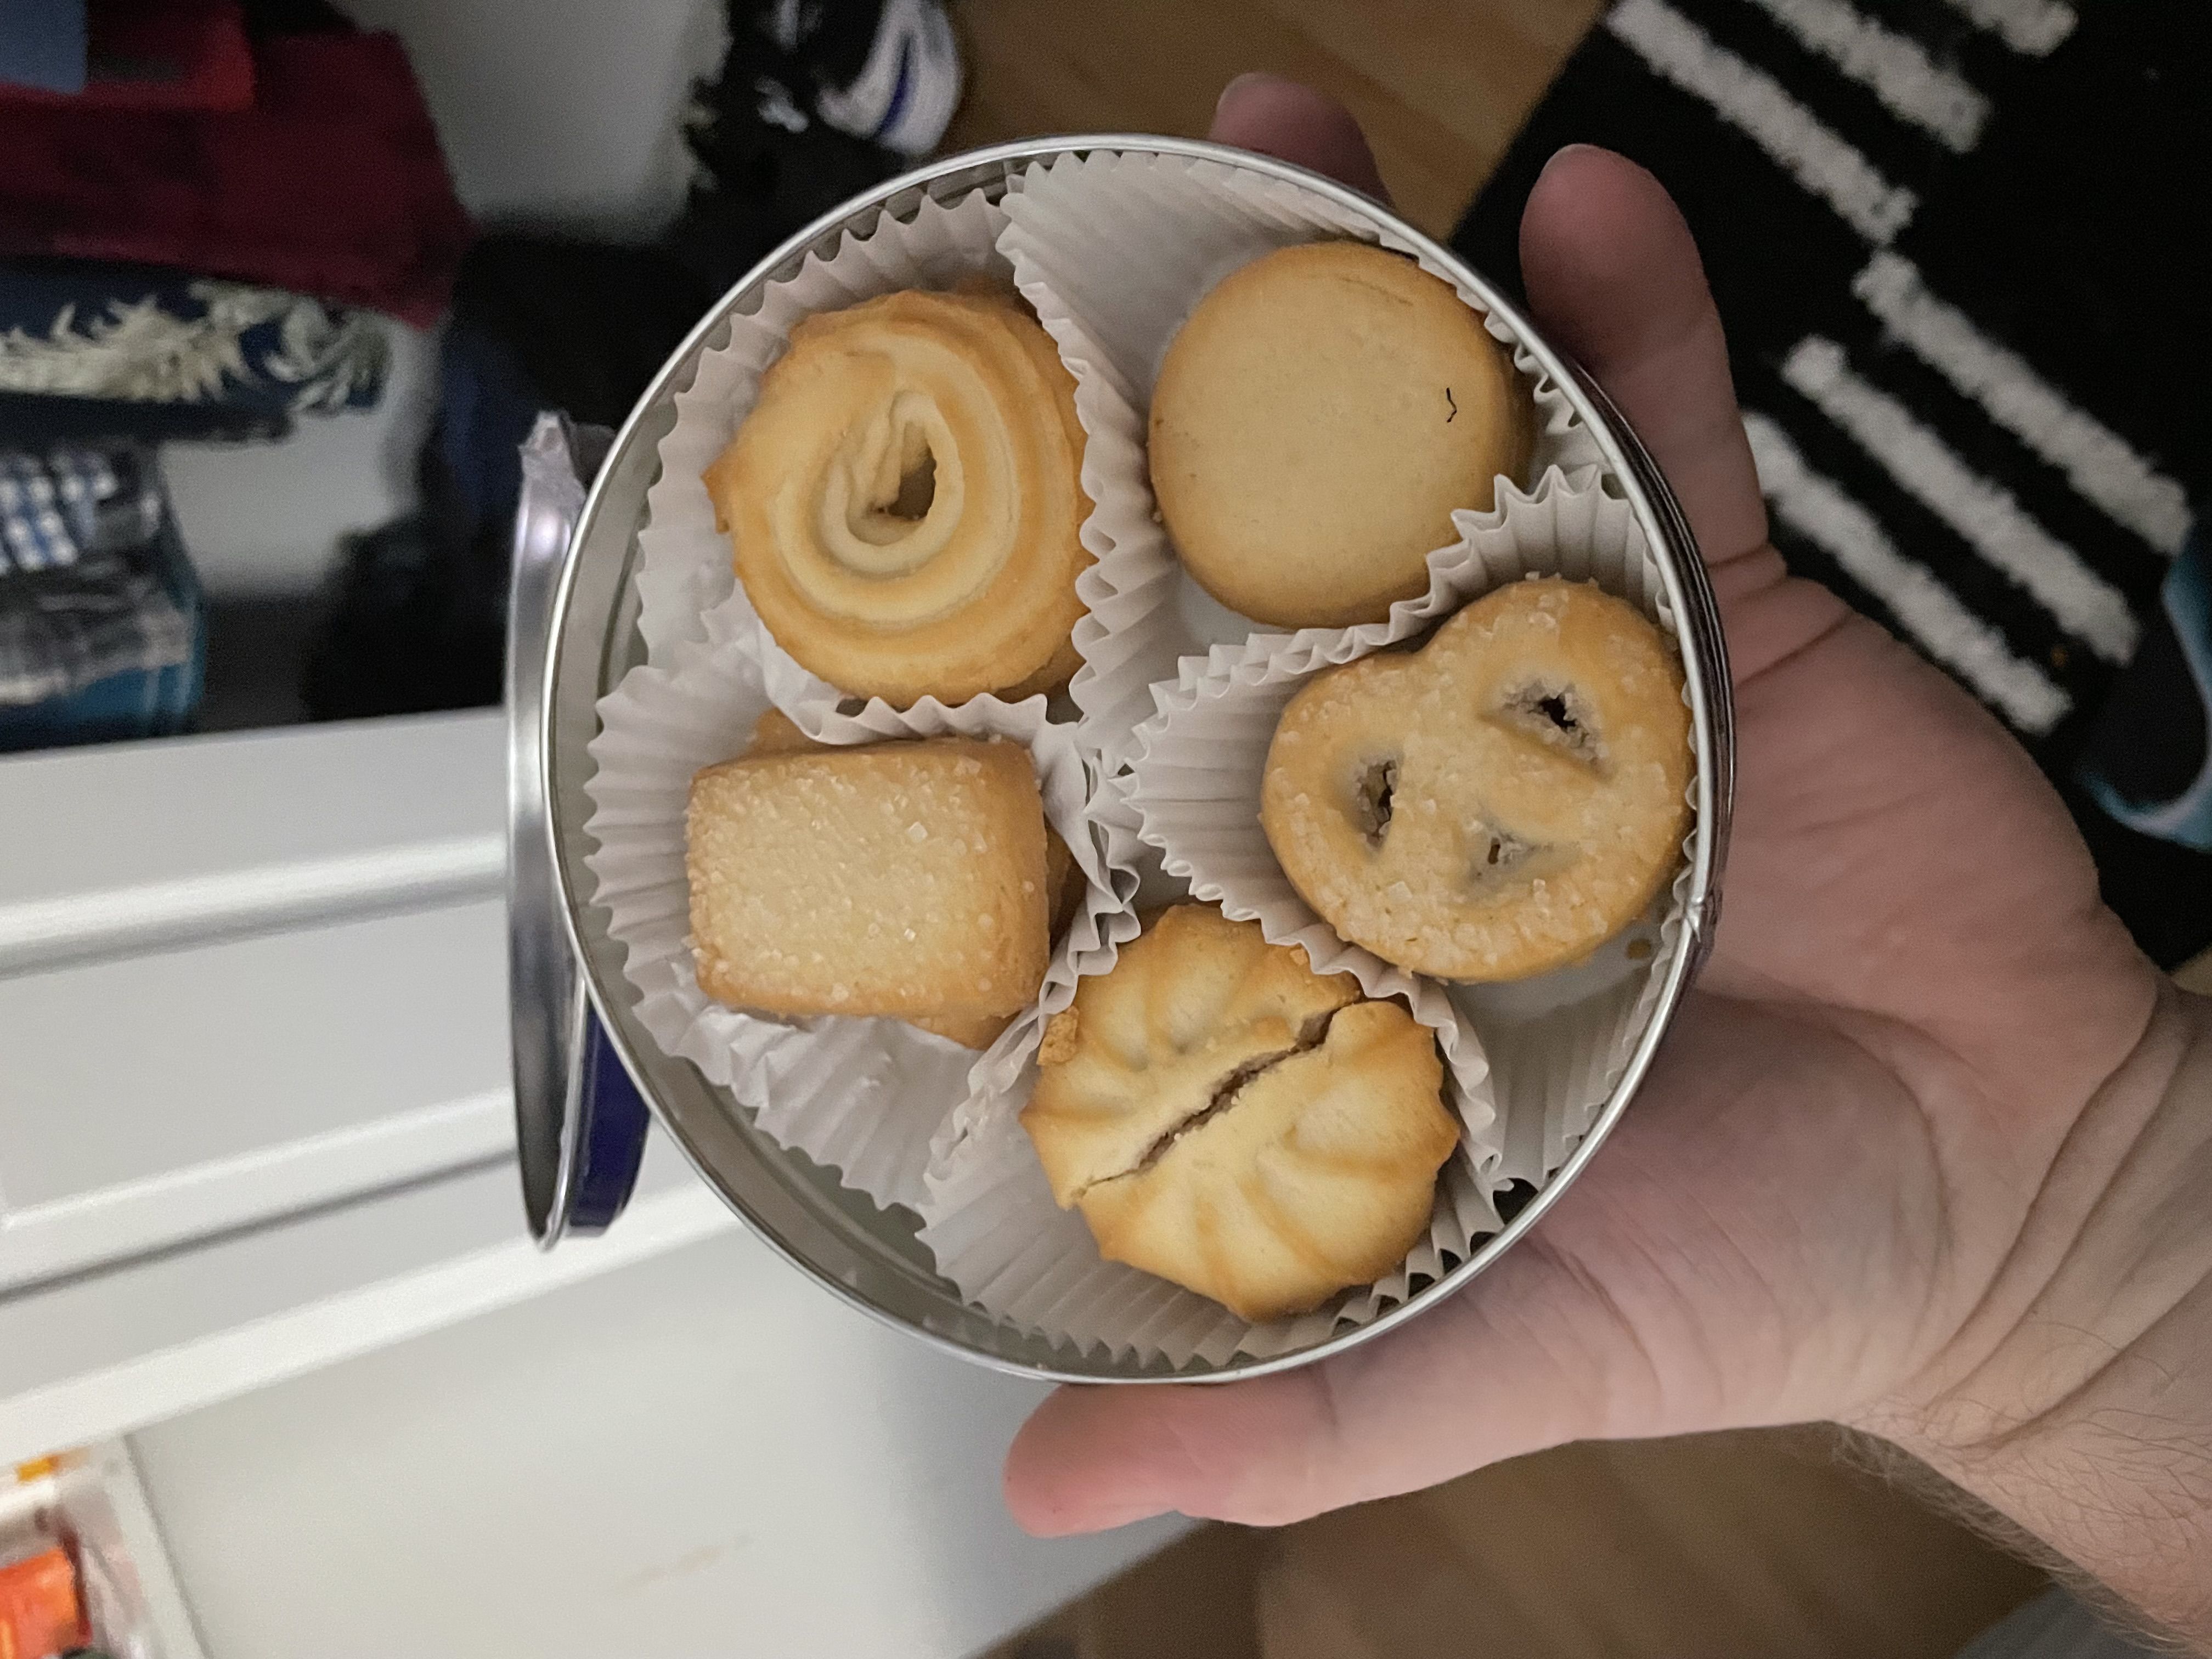 Where’s the ***ING SEWING KIT